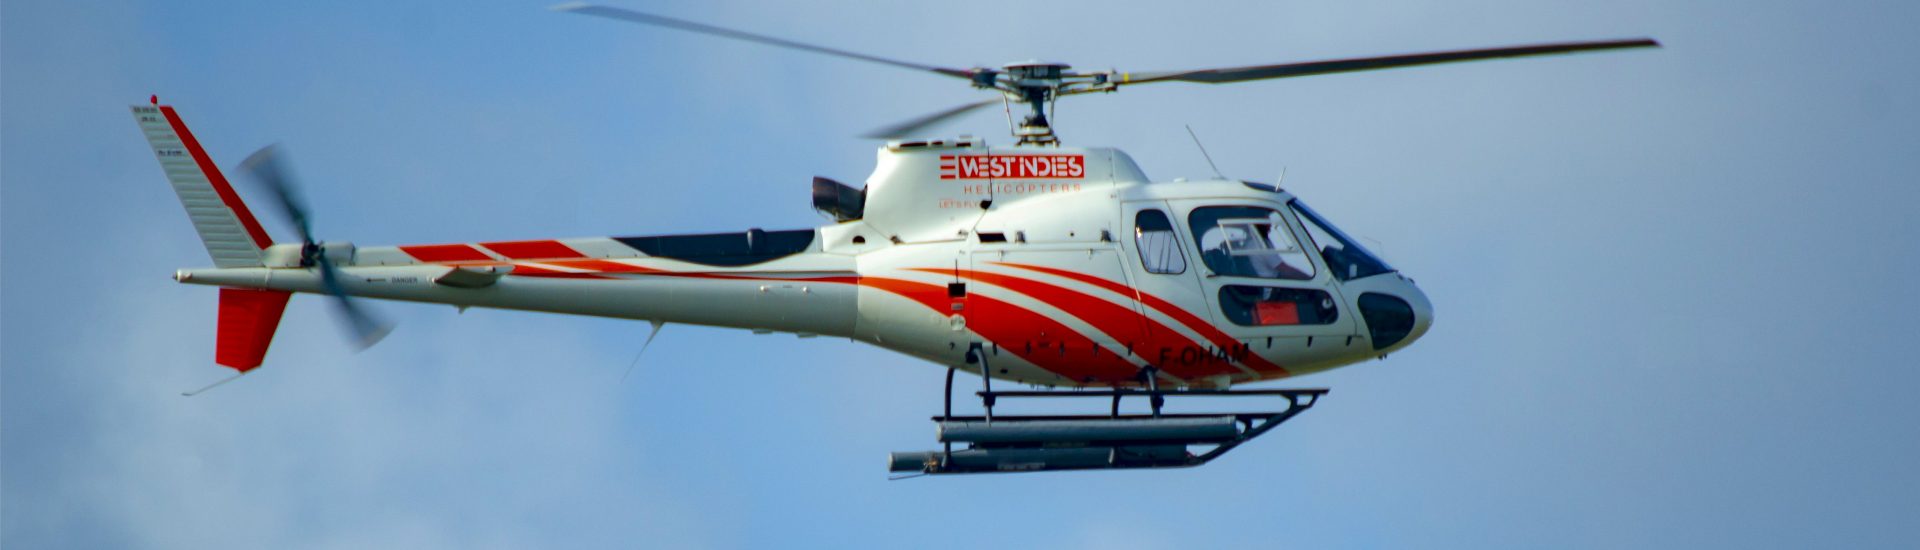 AS350B West Indies Helicopters F-OHAM